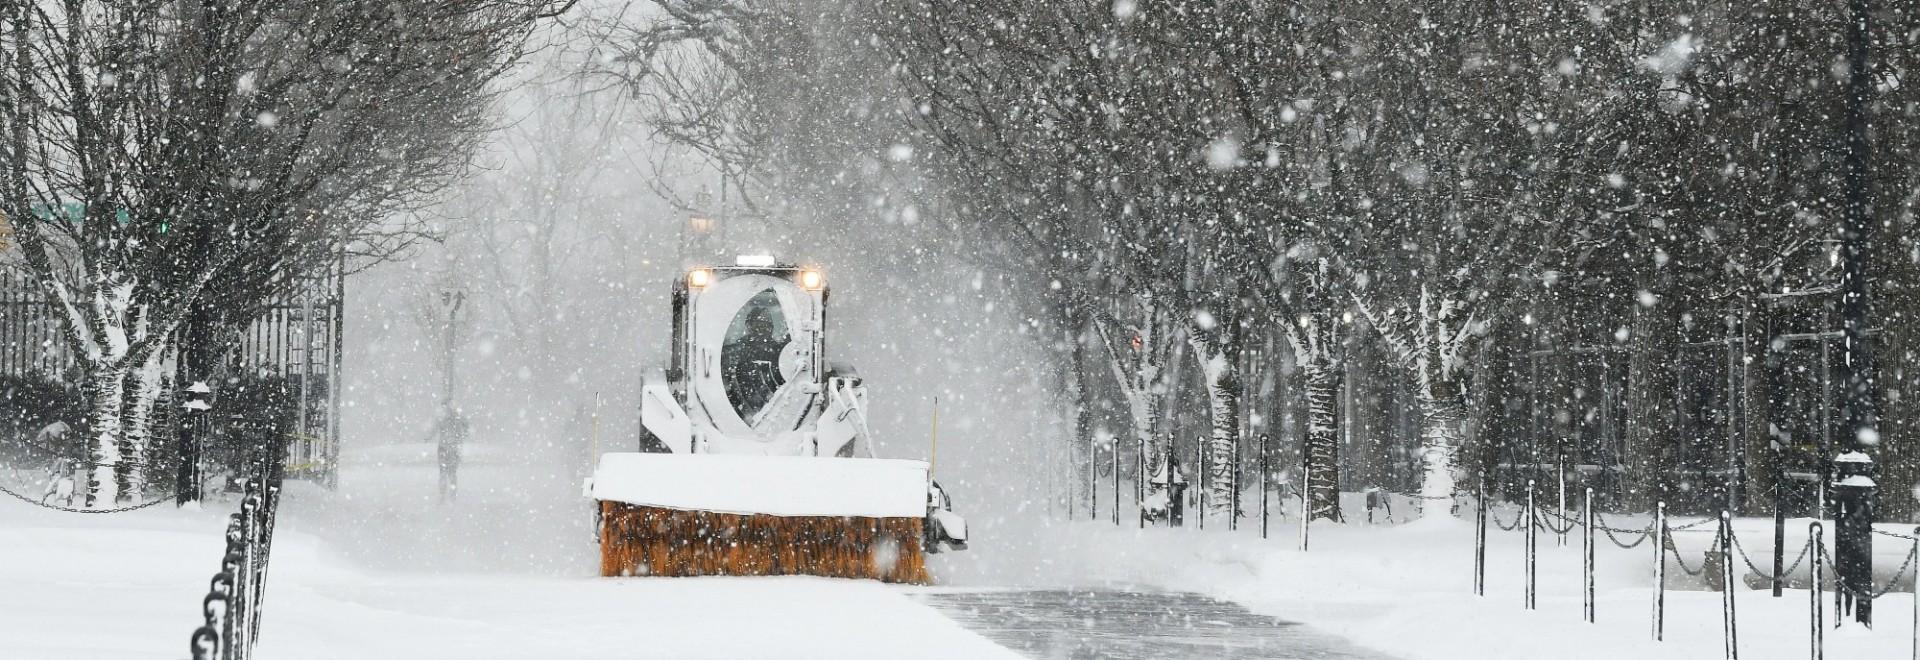 A snowplow plows College Walk during a snowy day.